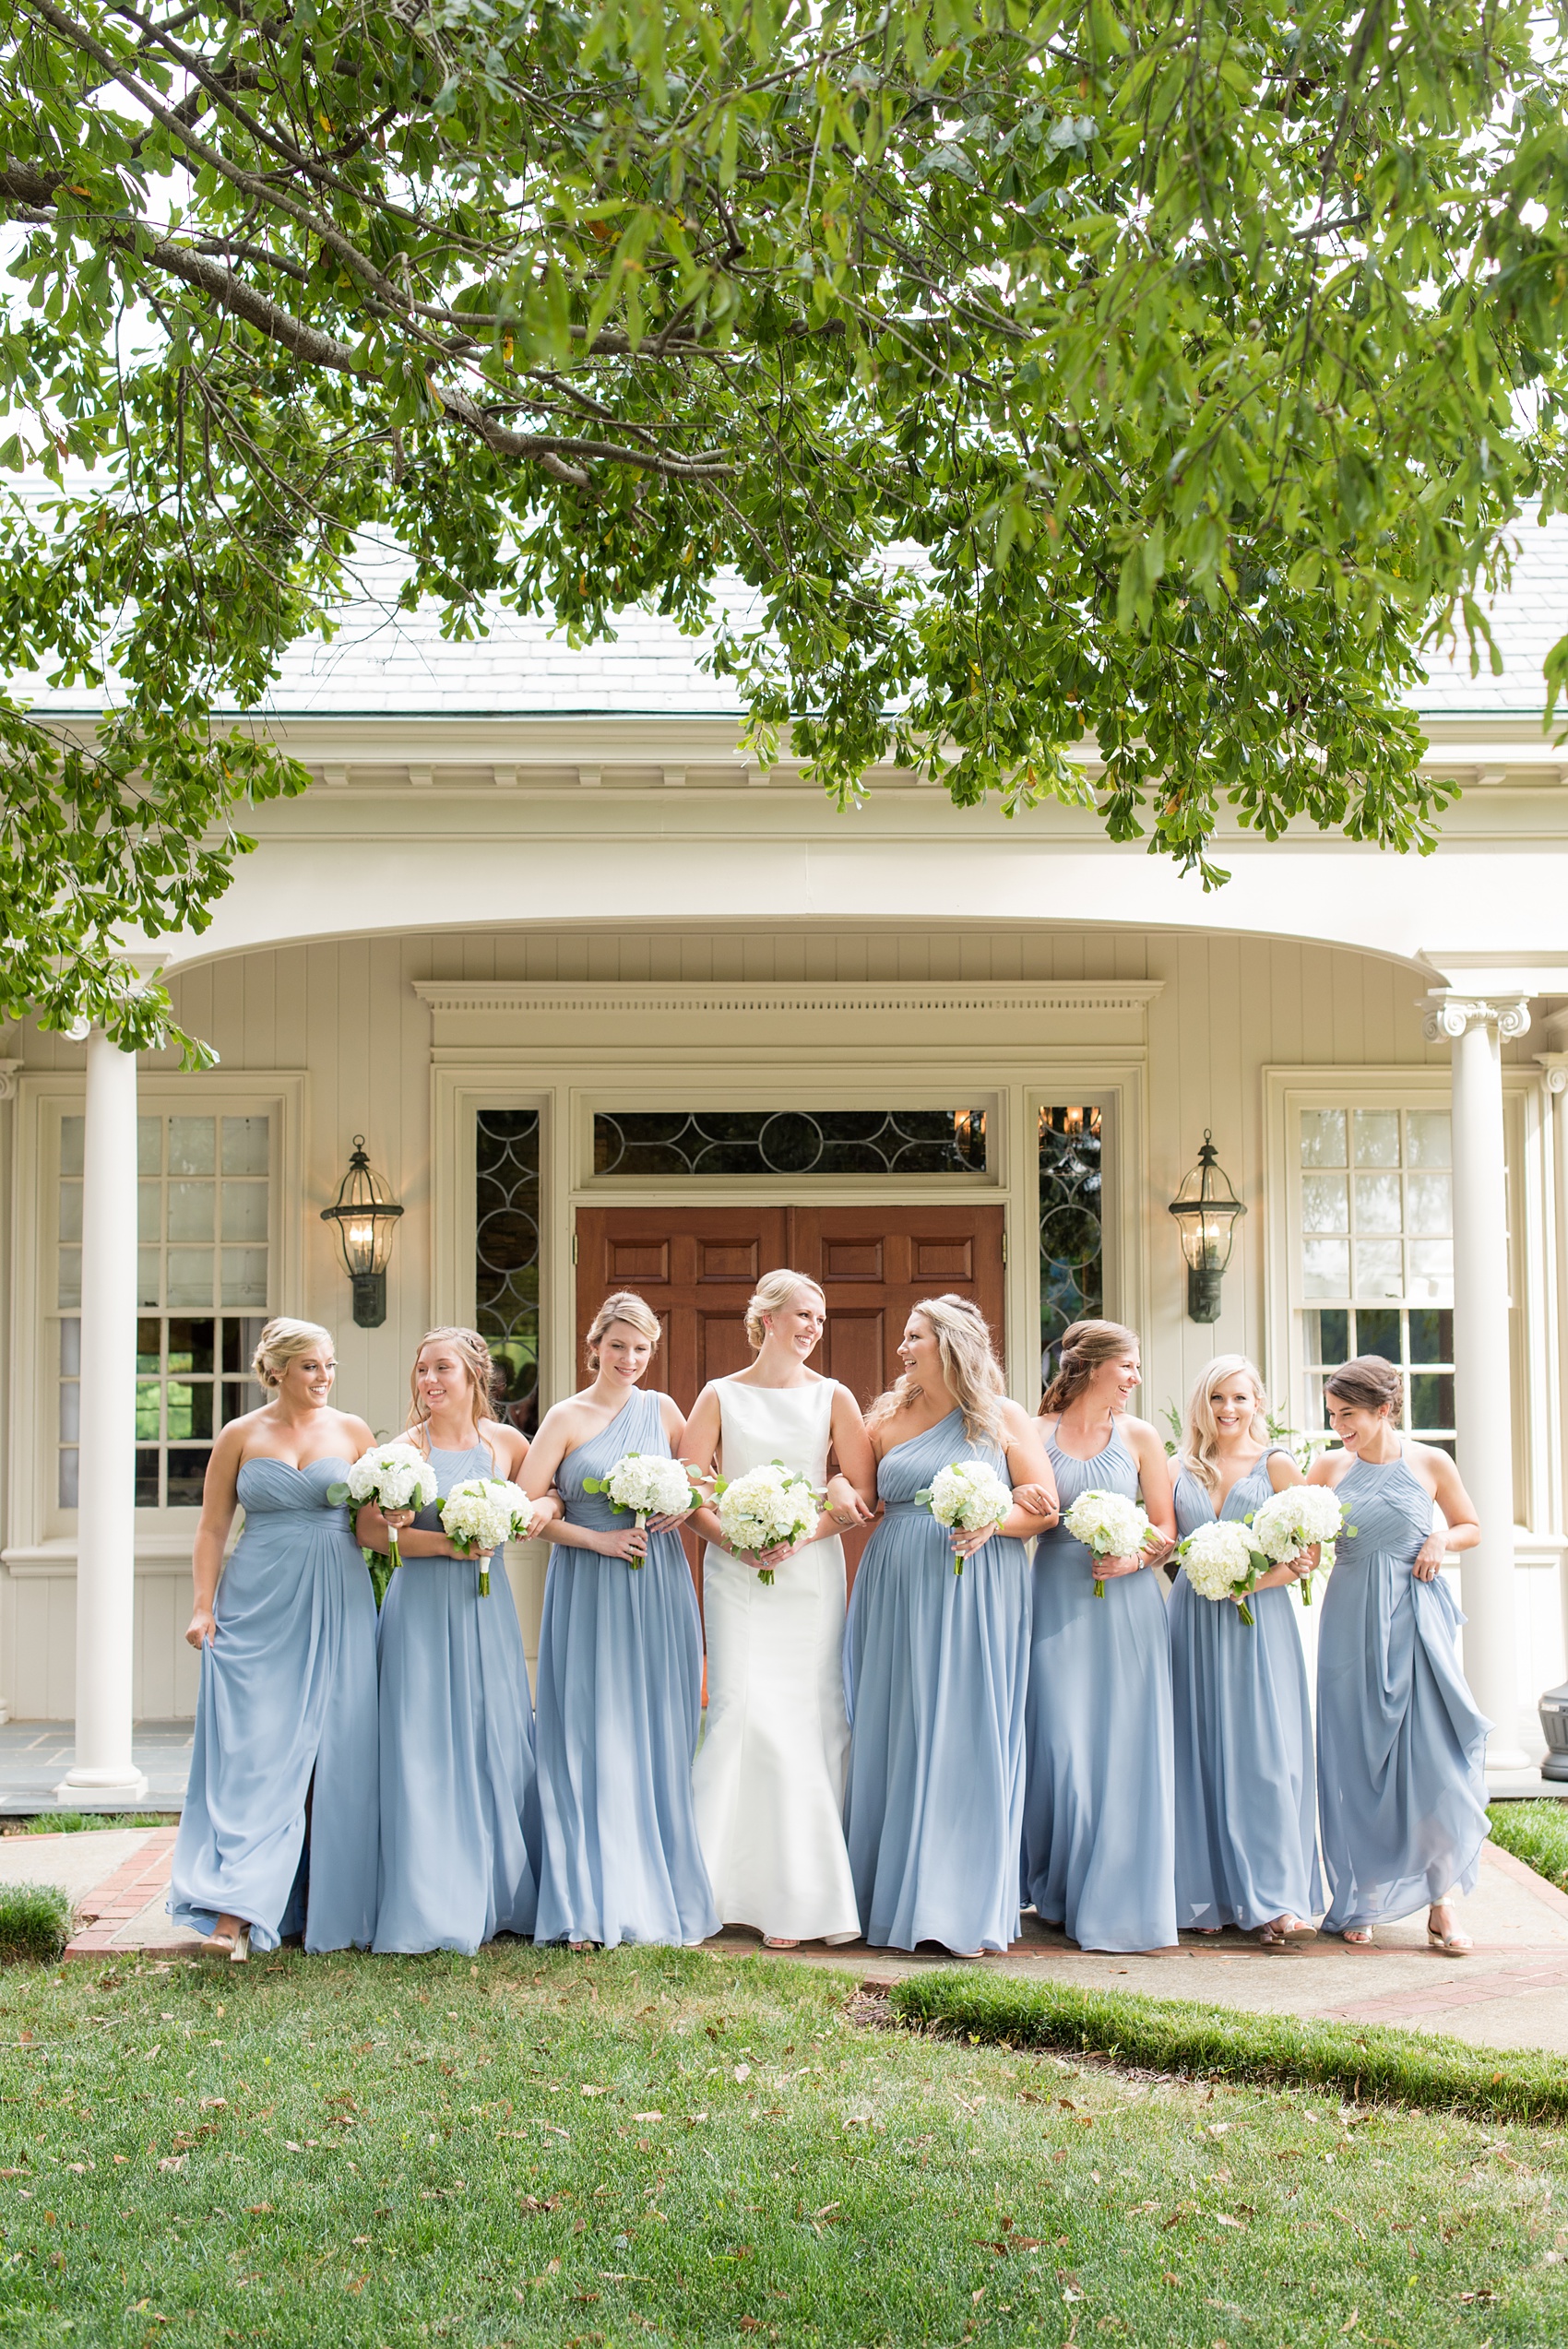 Mikkel Paige Photography captures Croasdaile Country Club wedding photos during a summer celebration. This golf course venue in Durham, North Carolina, is beautiful for photography outdoors, especially with a pretty bridal party in dusty blue and glowing bride! Click through for more from the day! #DurhamWedding #MikkelPaige #Durhamvenues #NorthCarolinawedding #southernwedding #GolfCourseWedding #CountryClubWedding #DustyBlueBridesmaids